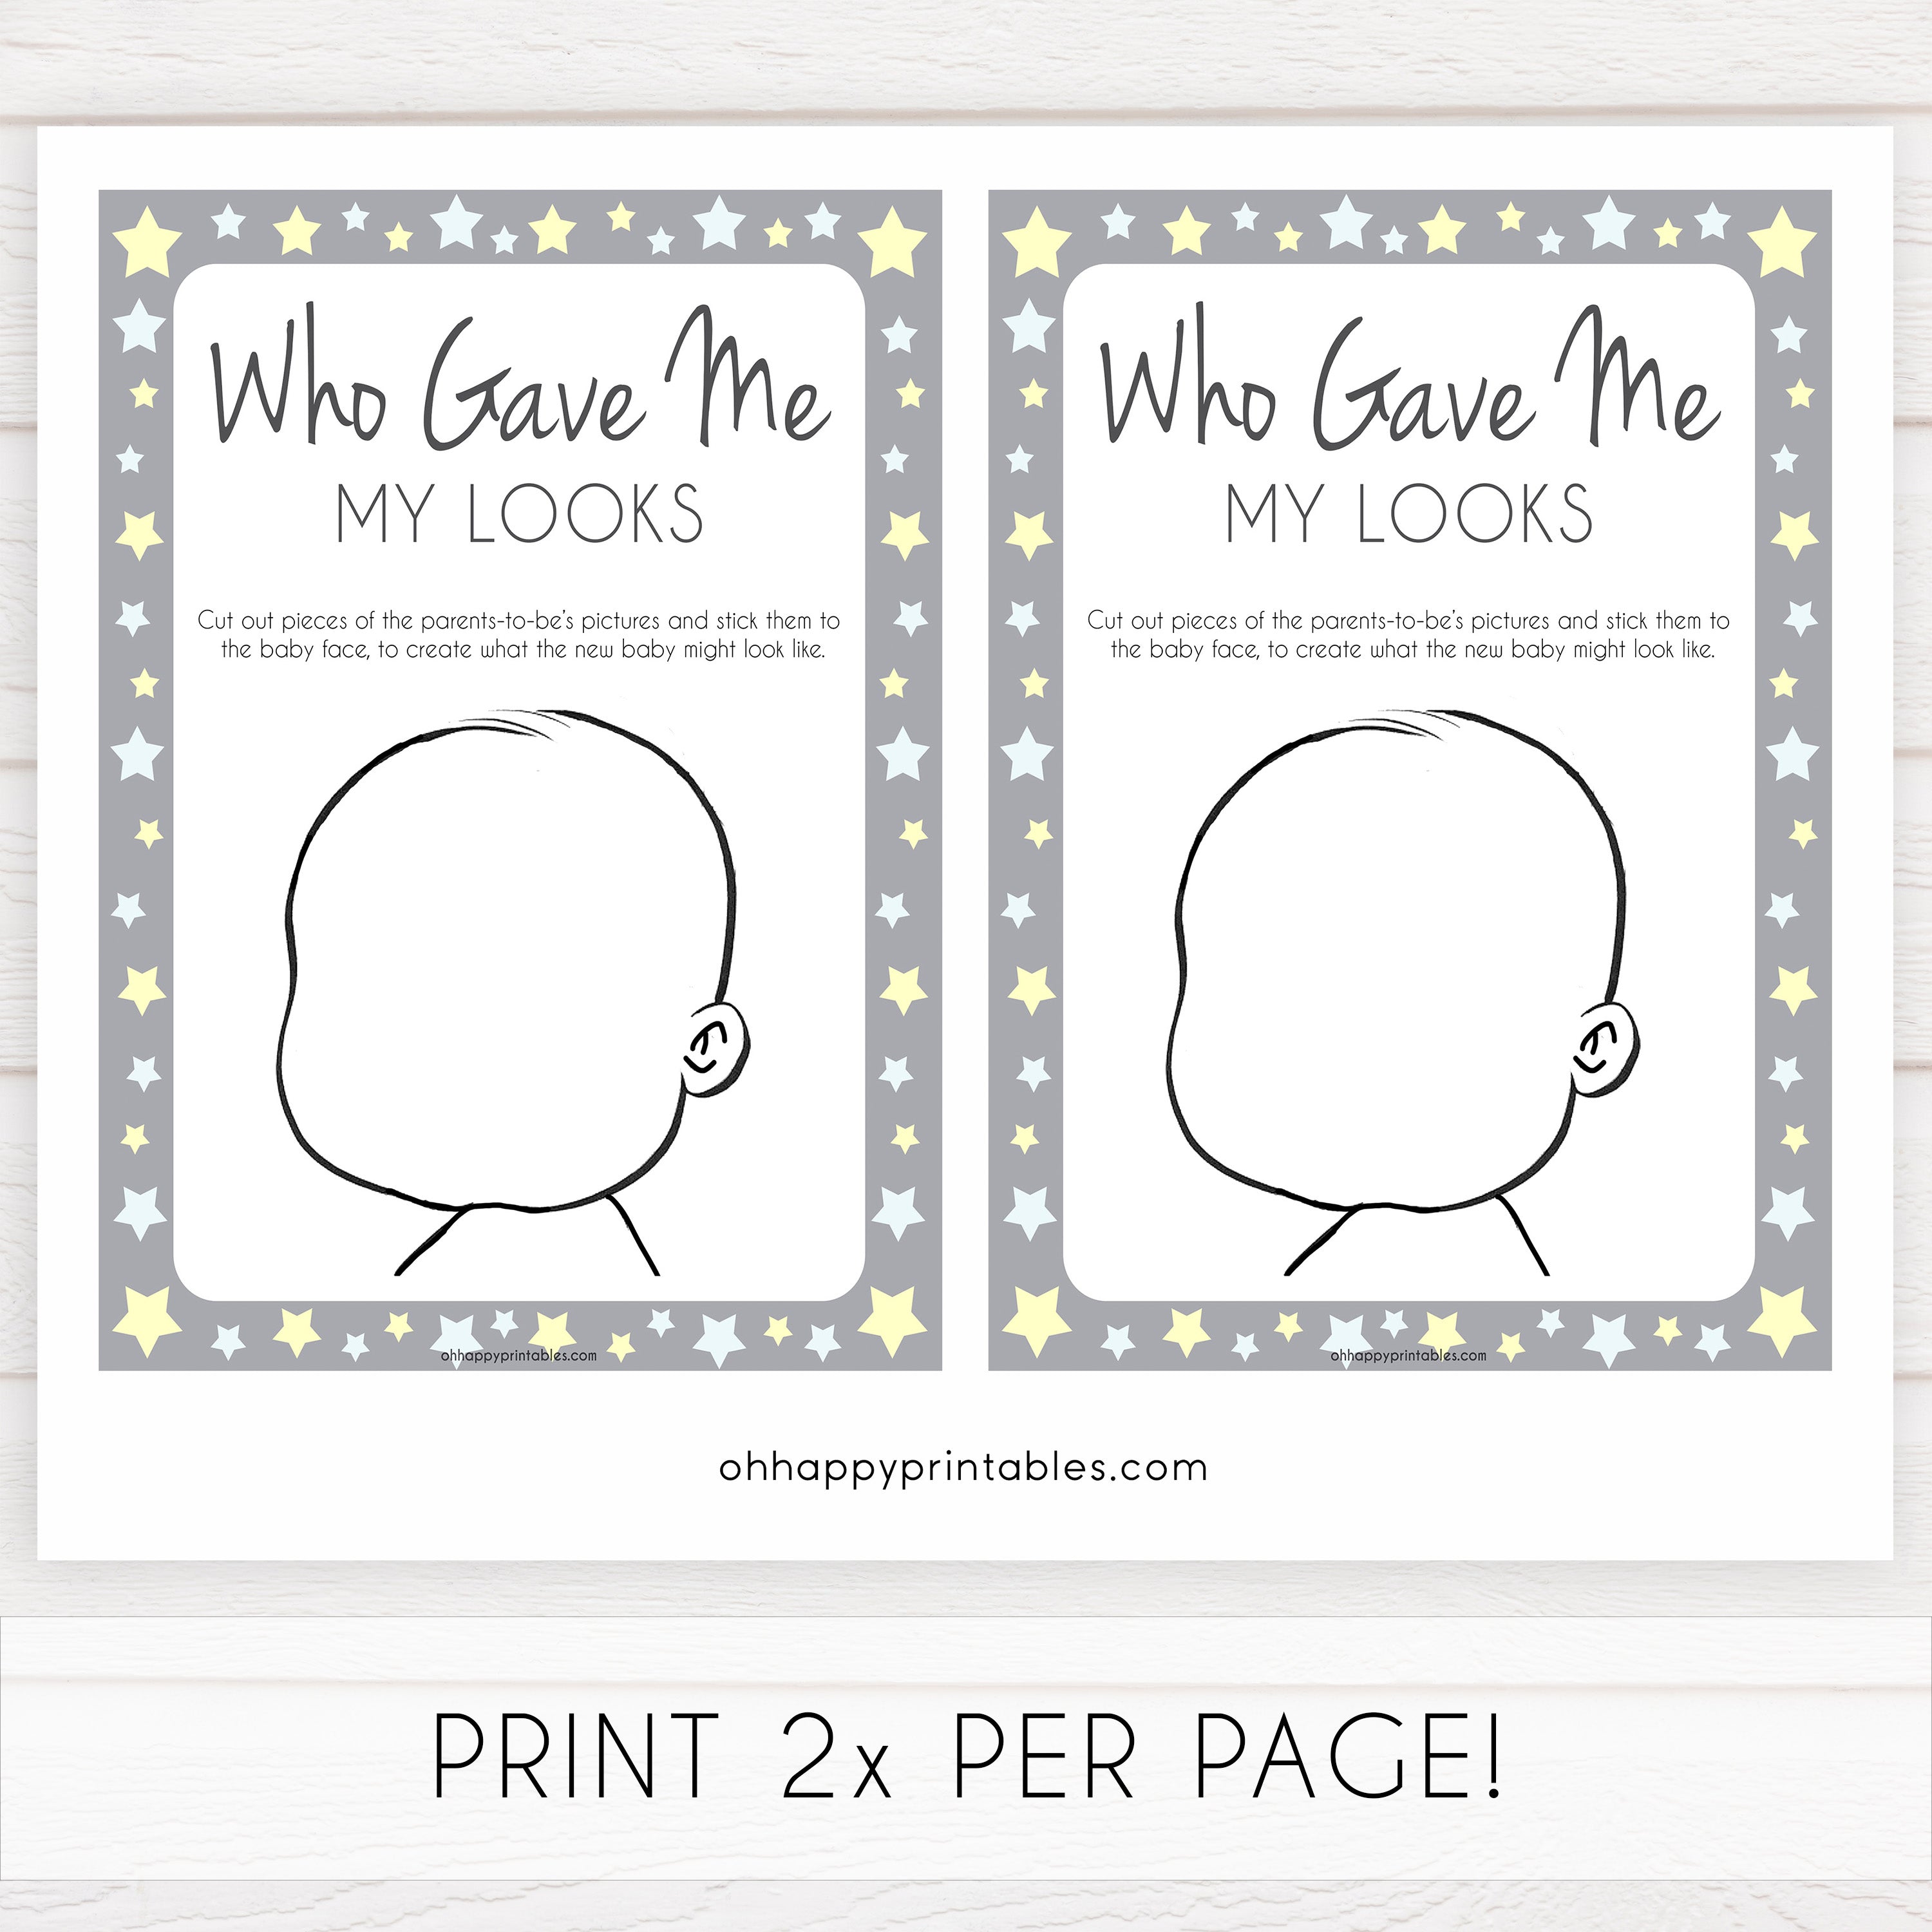 Grey Yellow Stars Baby Face Game, What Will Baby Look Like, Baby Face Guess The Looks, Printable Baby Shower Game, Baby Face, Gave Looks, fun baby shower games, popular baby shower games